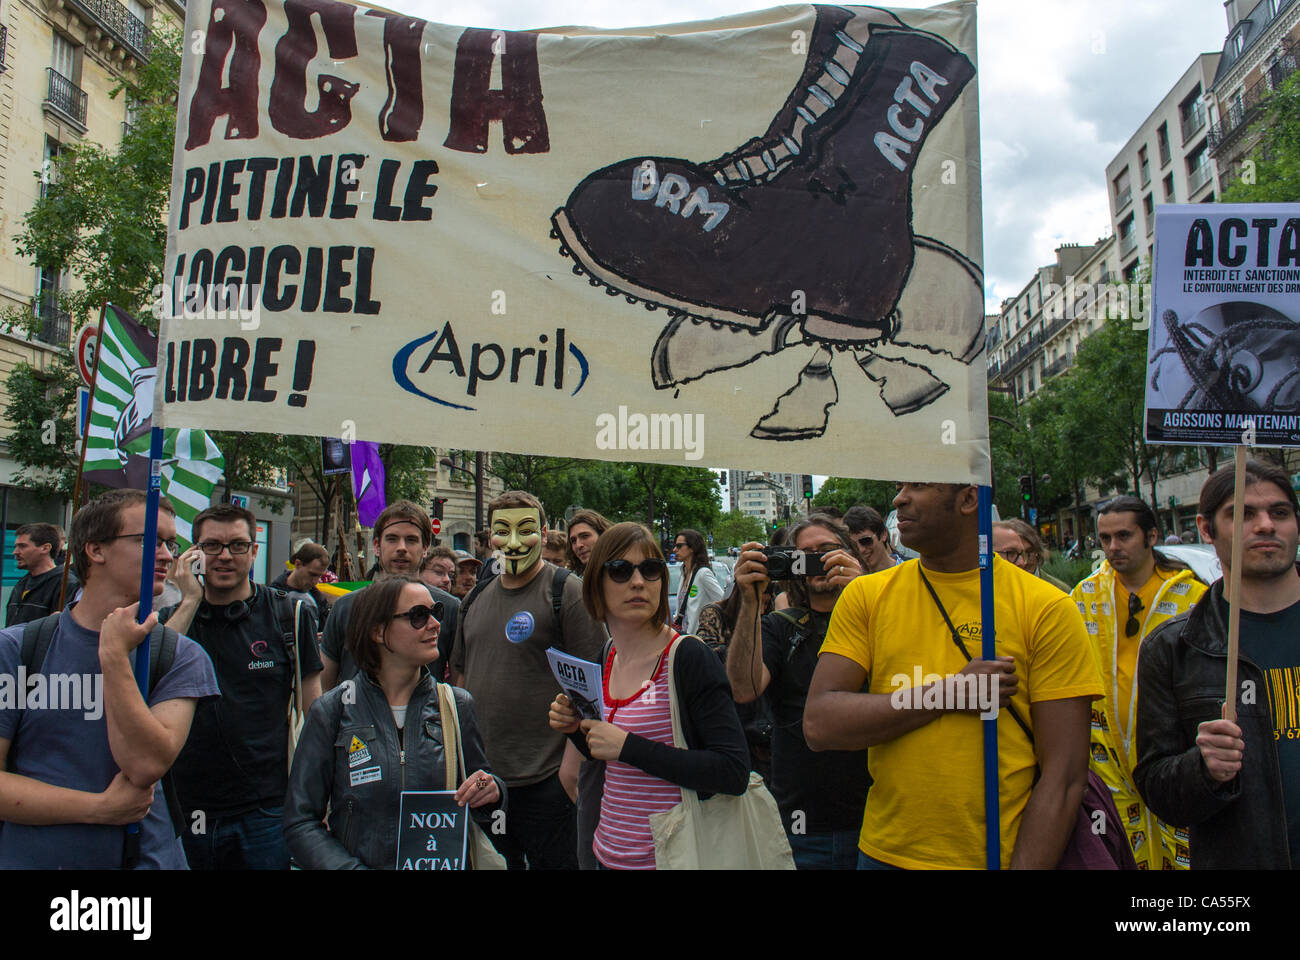 Activists from an Anti- ACTA Internet Accords Law, who oppose communications and censorship of internet networks, Holding Banners and signs,  at a Demonstration in Paris, France, protest free trade, young people protesting Stock Photo